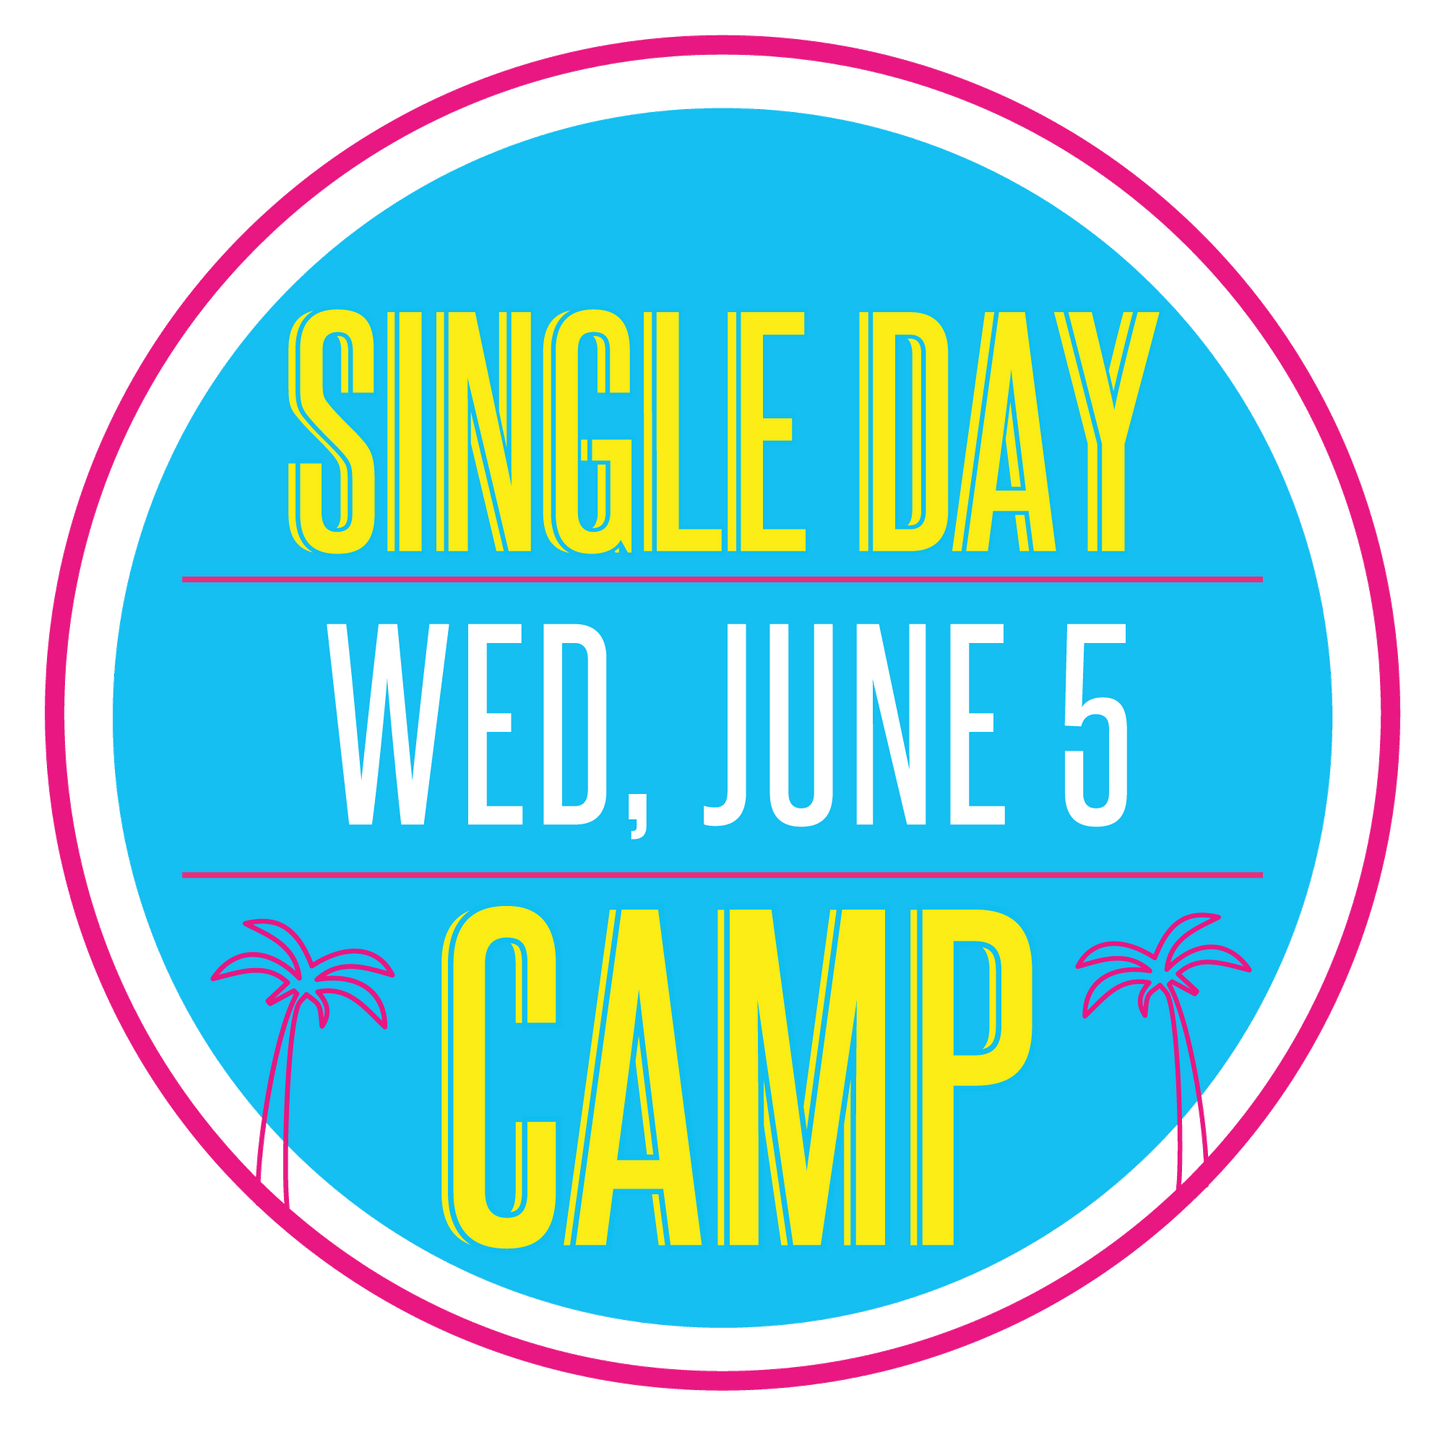 Single Day Sewing Workshop: Wednesday, June 5, 9am-3pm